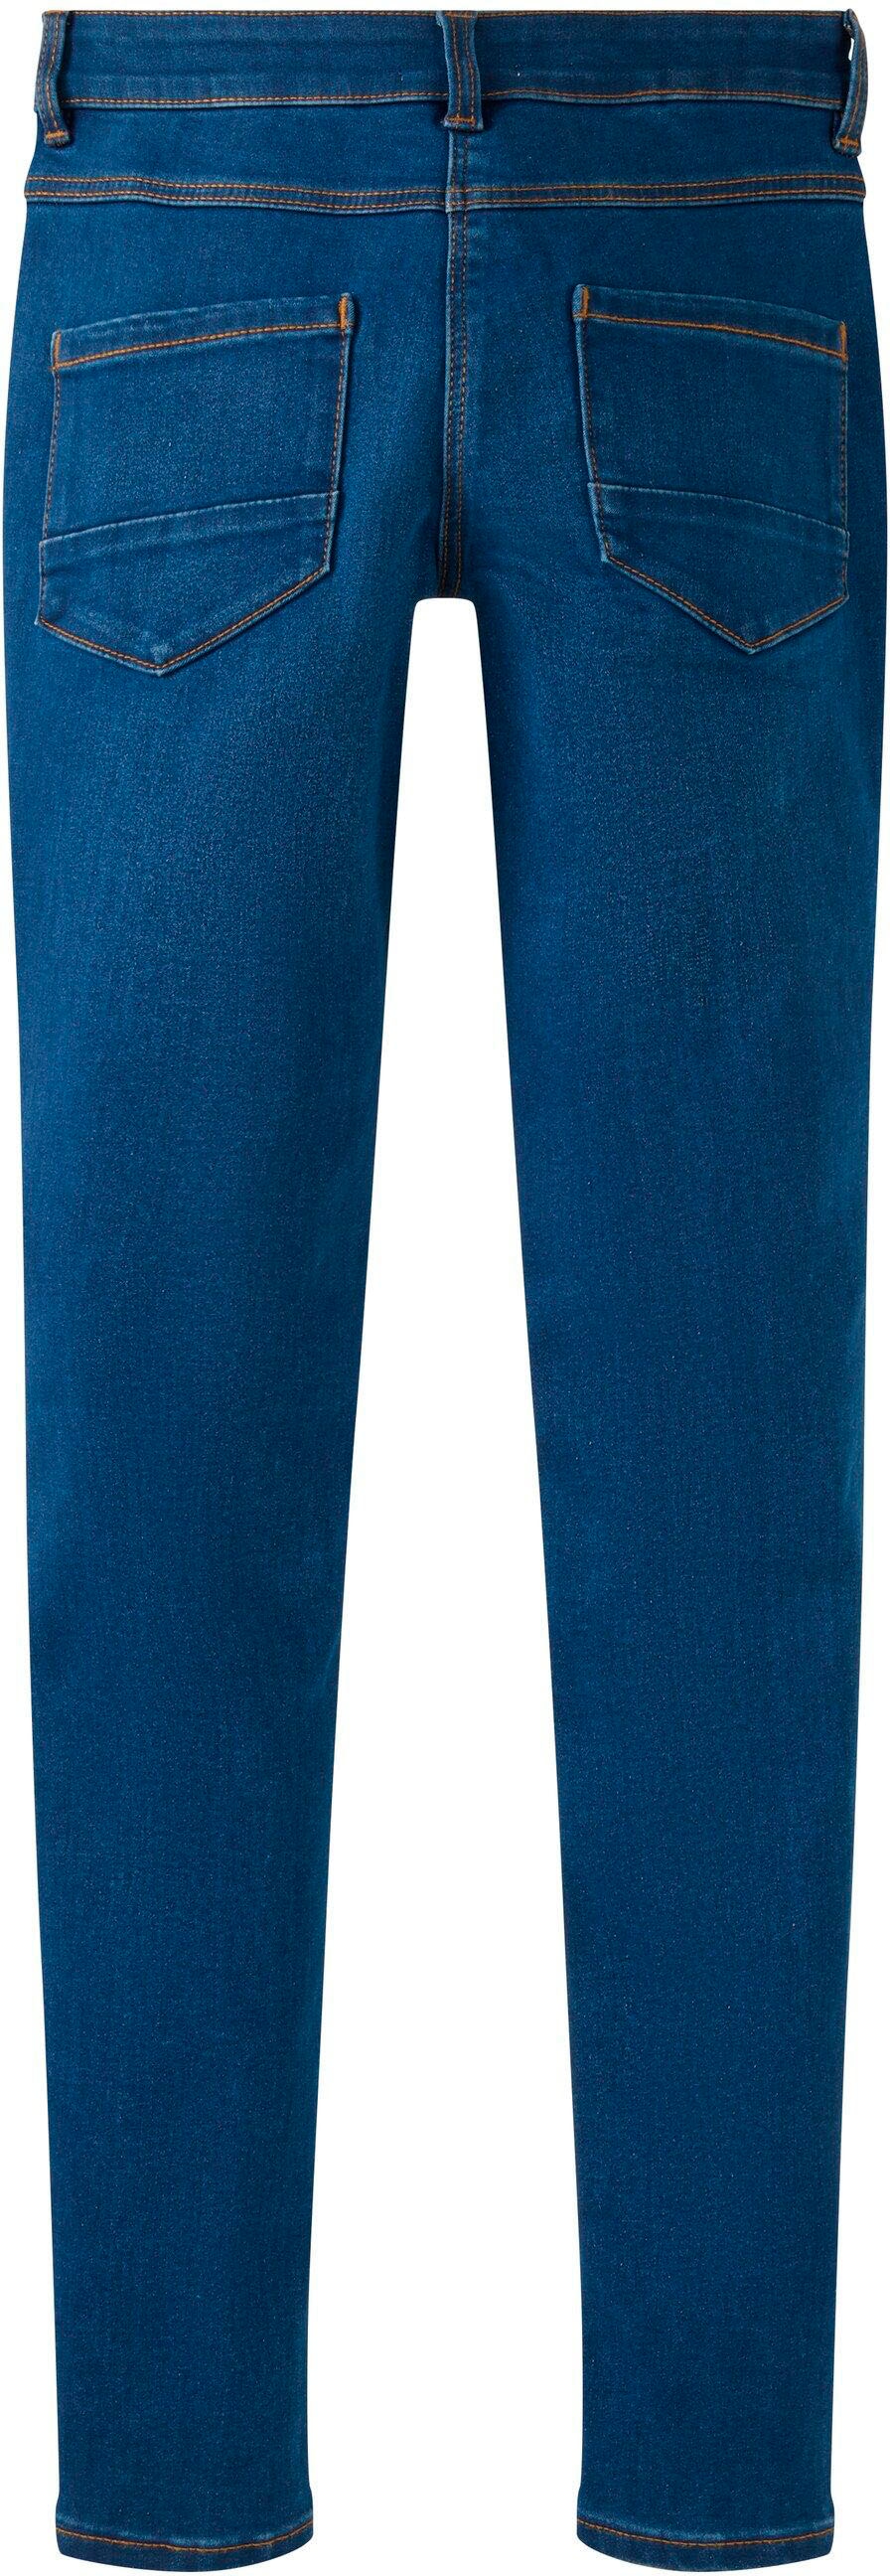 TOM TAILOR Skinny-fit-Jeans »LISSIE extra«, mit Stretch